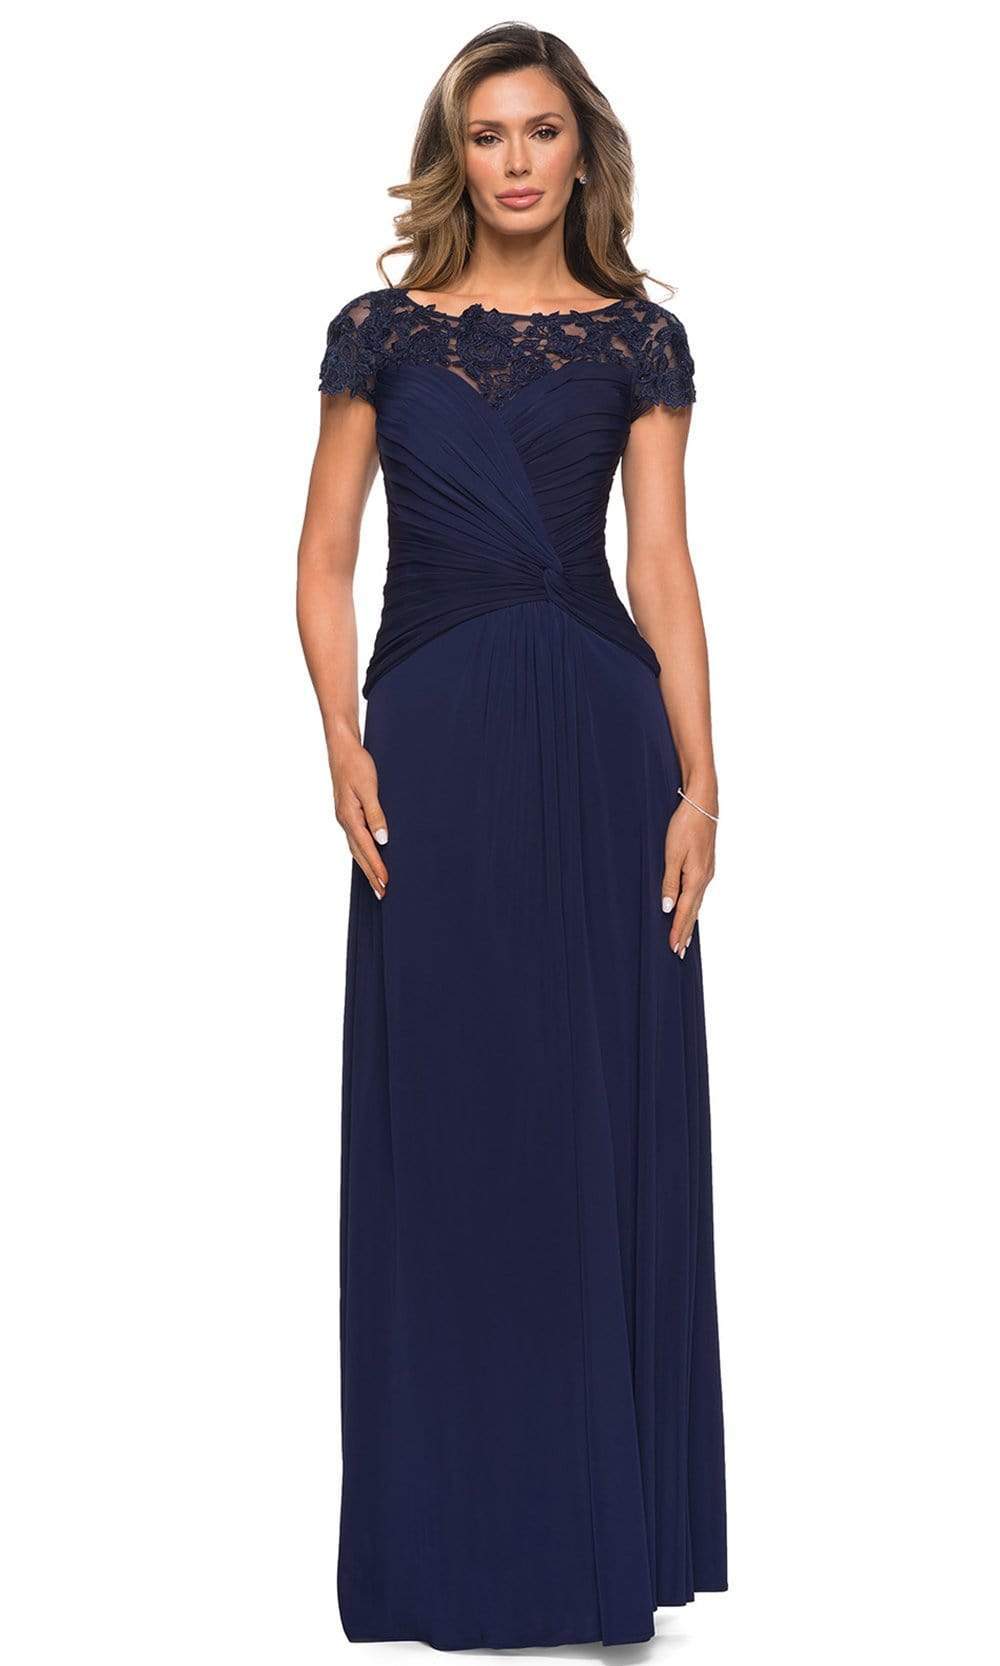 La Femme - 28029 Ruched Knotted A-Line Evening Dress
